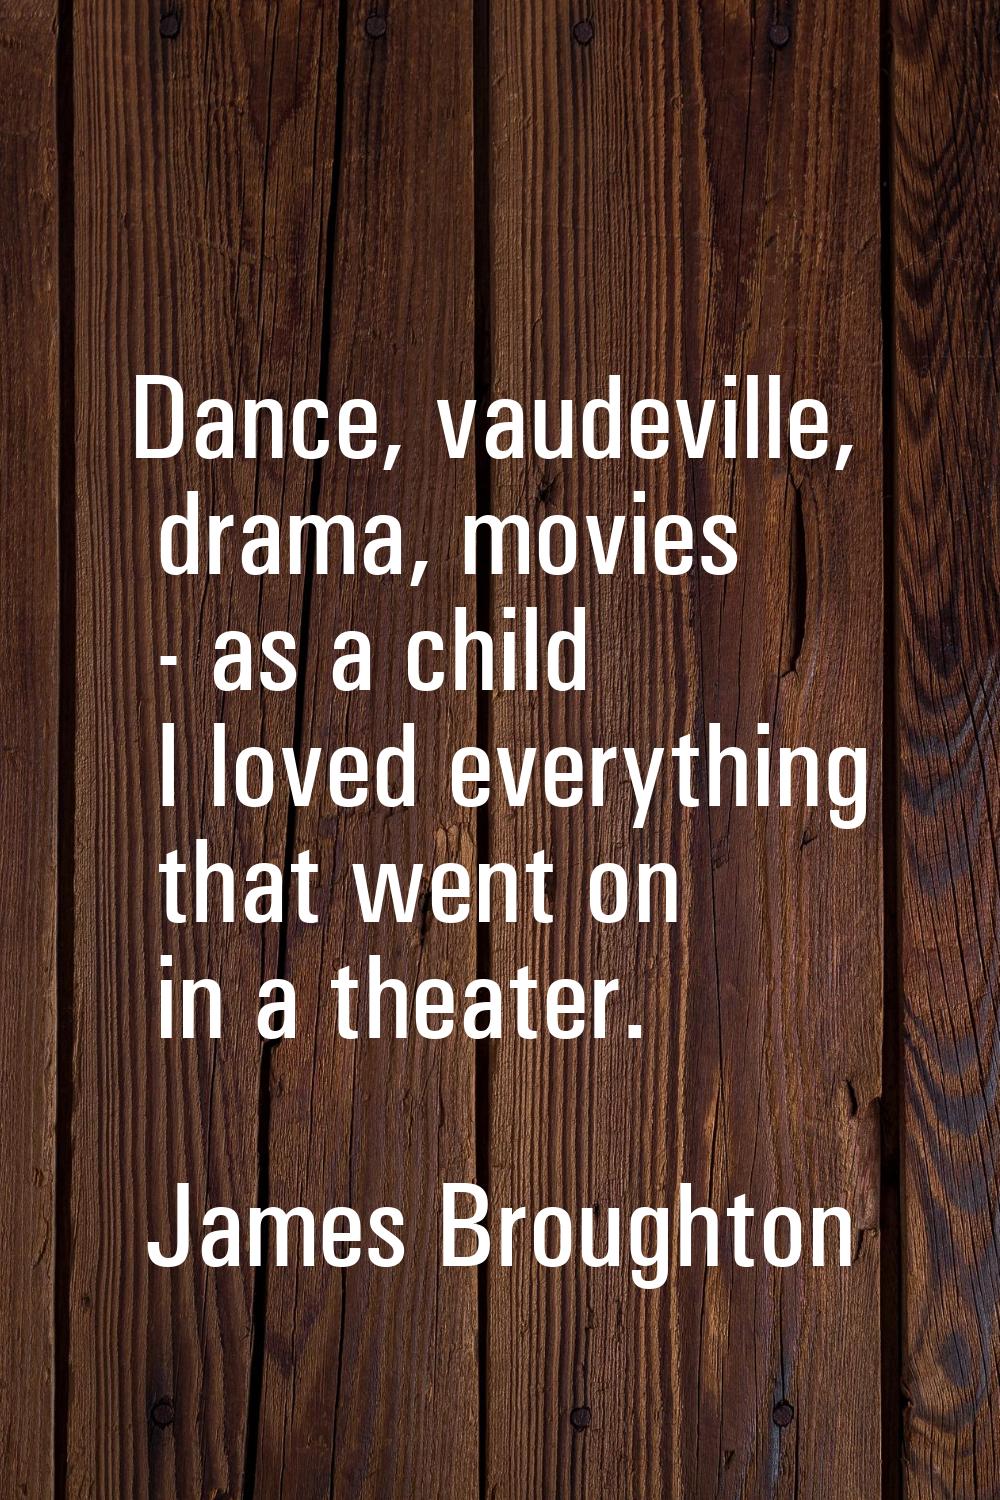 Dance, vaudeville, drama, movies - as a child I loved everything that went on in a theater.